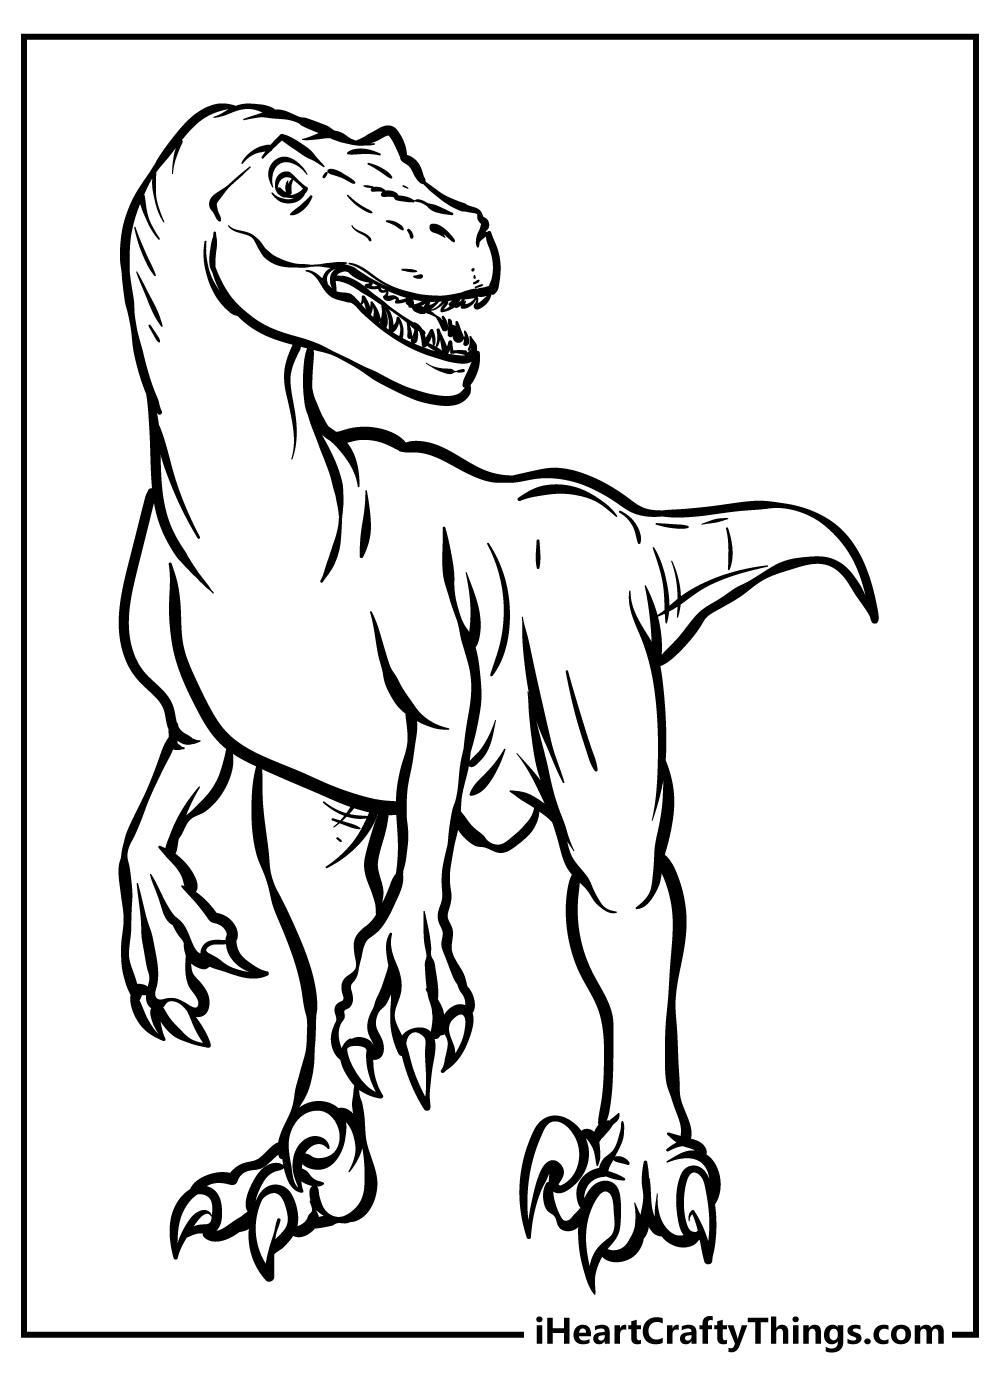 Jurassic World Coloring Pages for kids free download